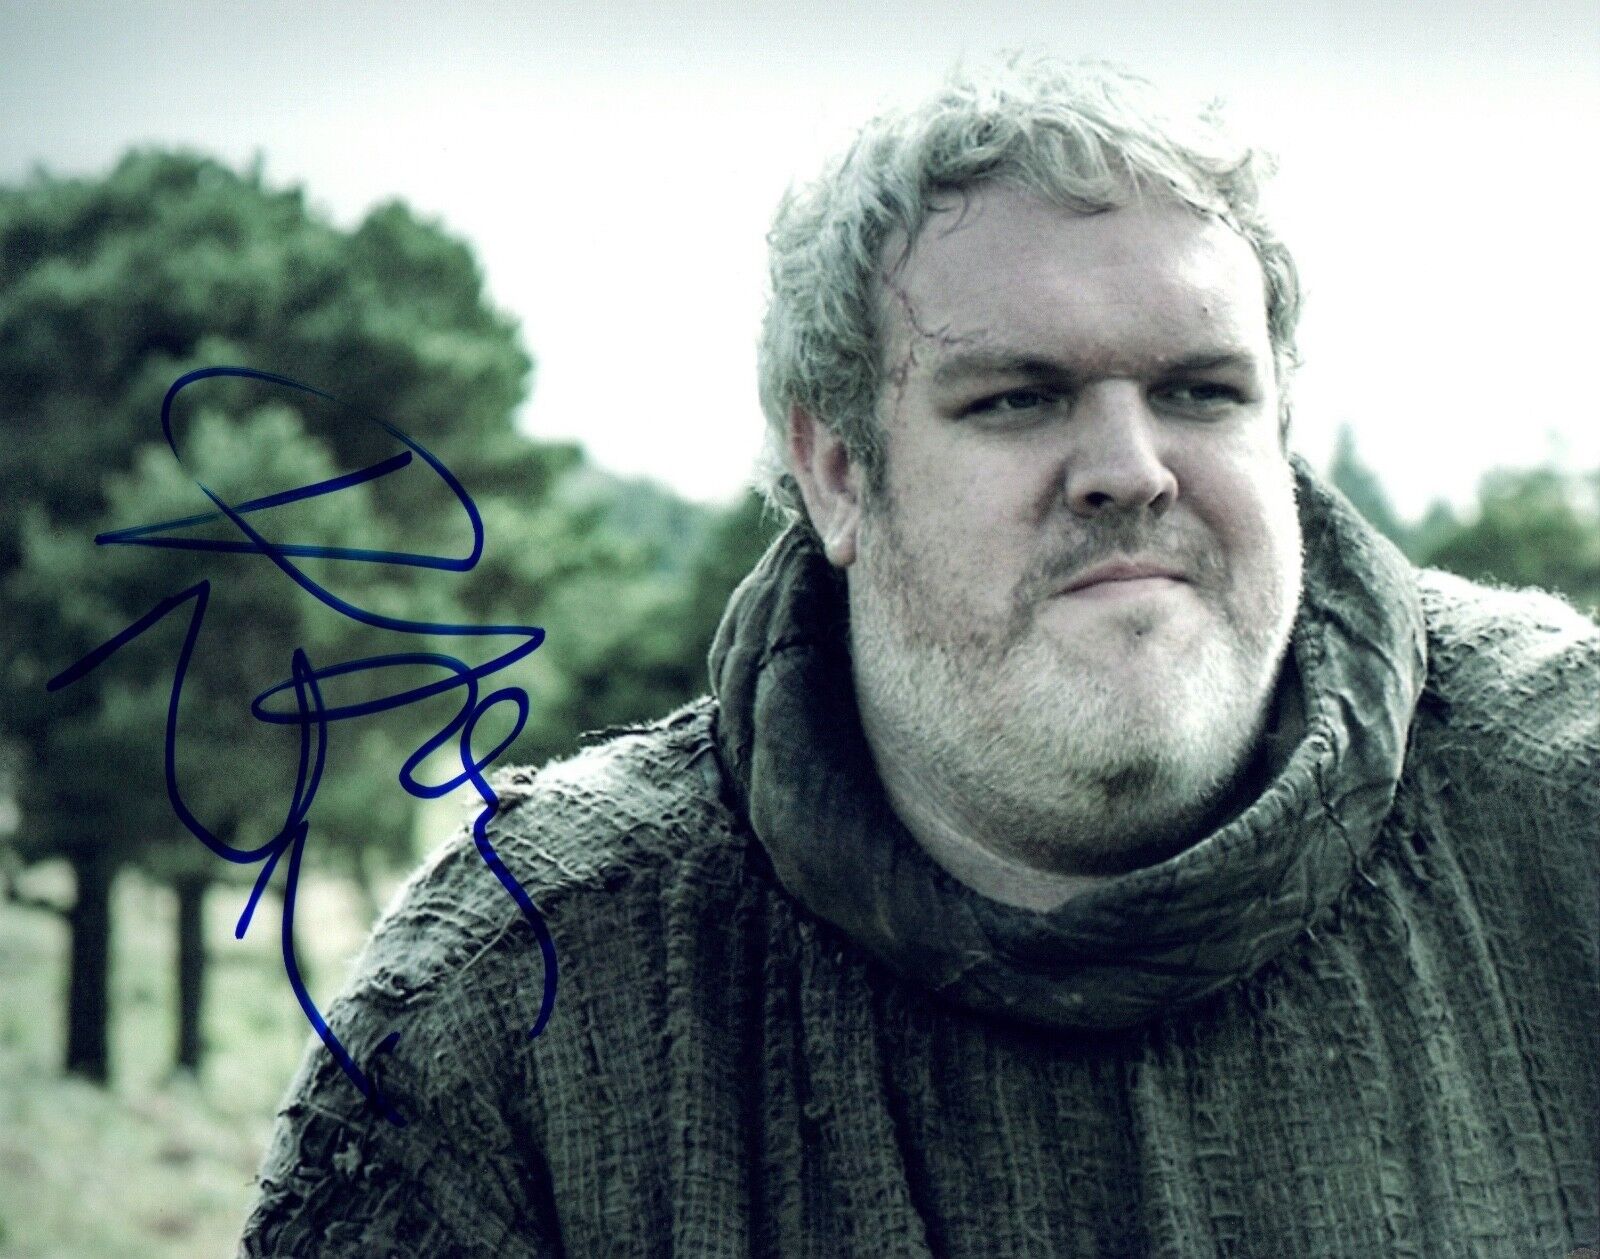 Kristian Nairn Signed Autographed 8x10 Photo Poster painting Hodor Game of Thrones COA AB